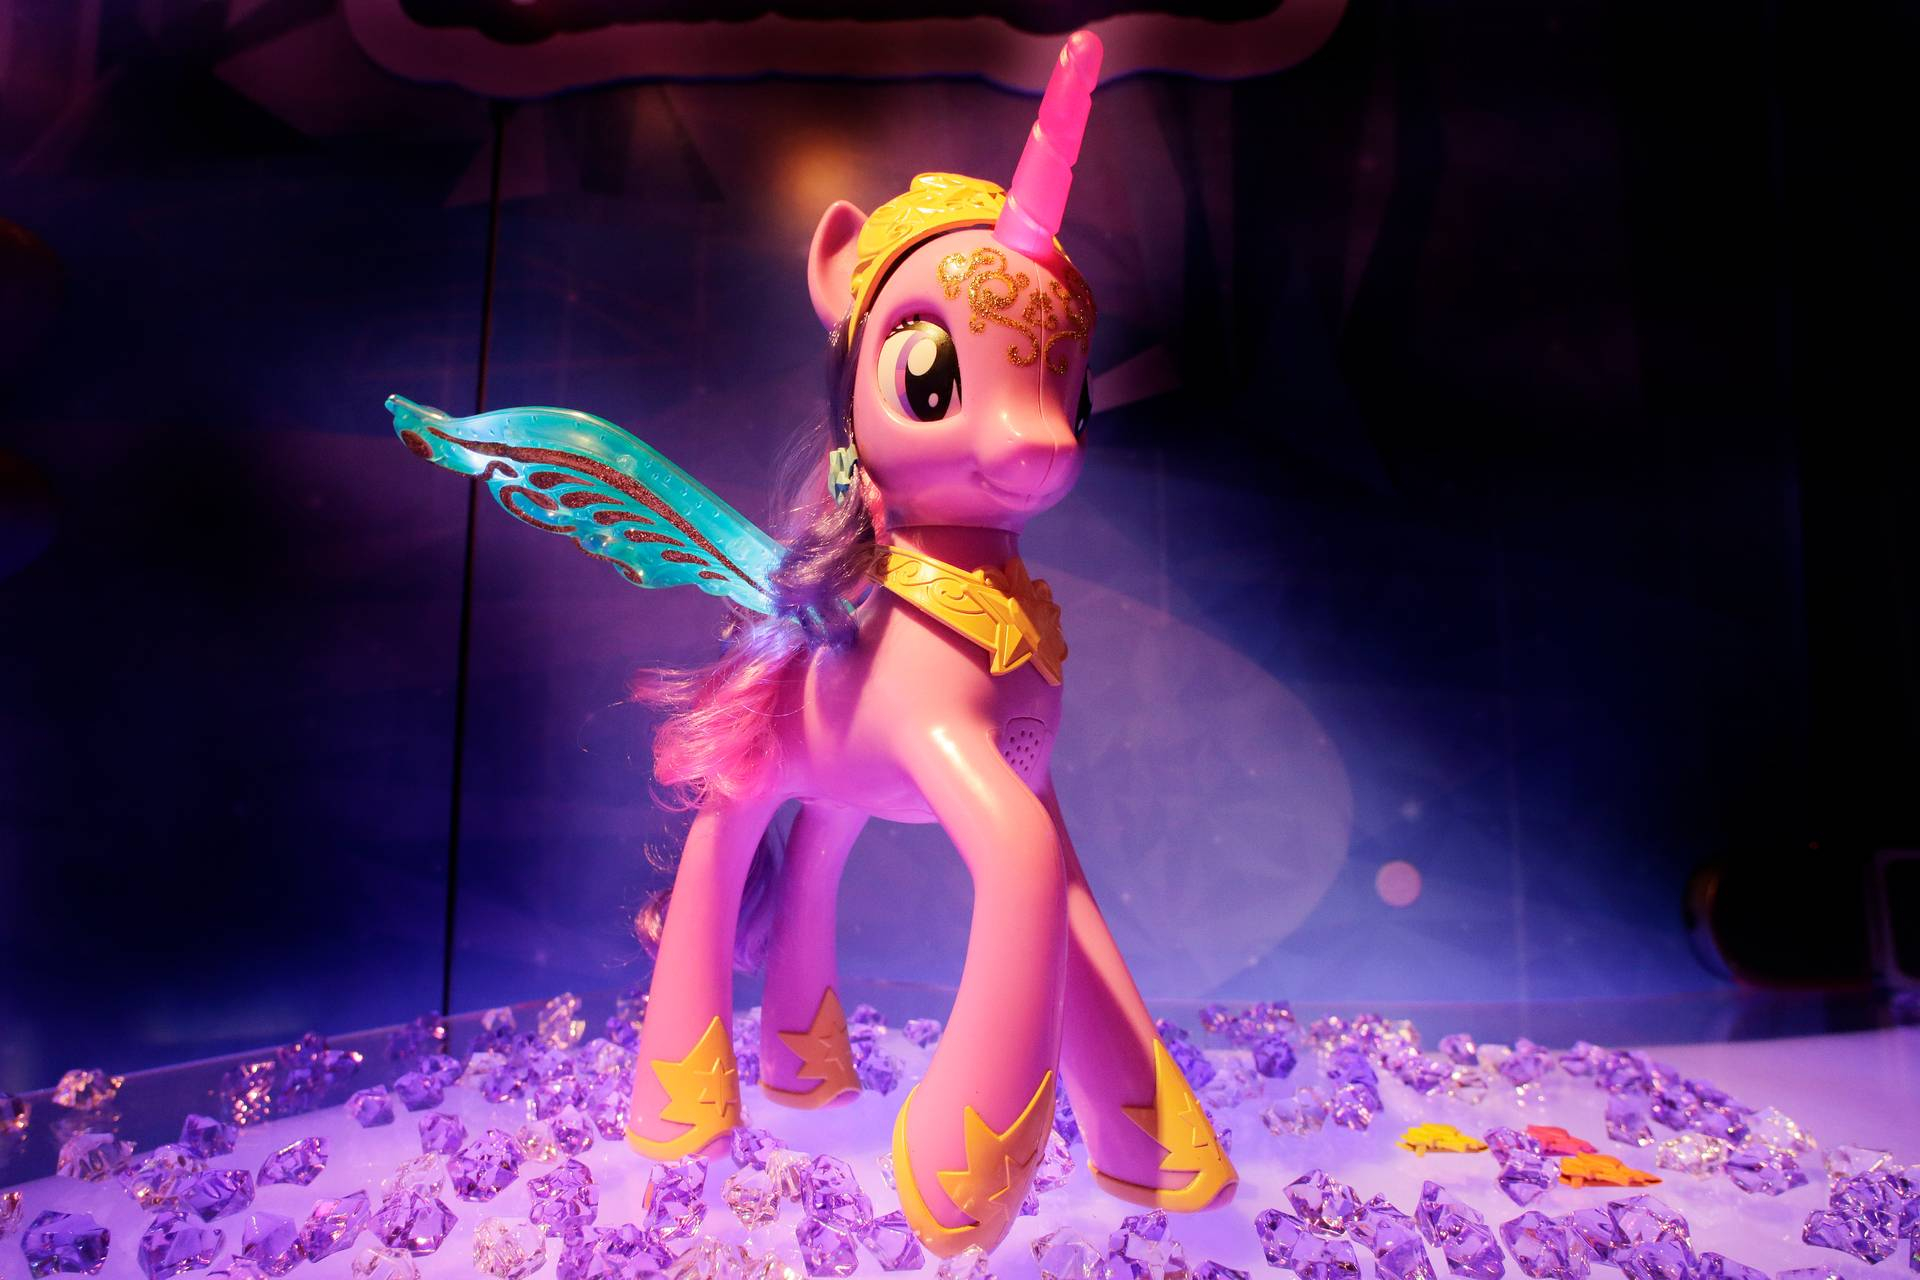 FILE - In this Feb. 12, 2013 file photo, Hasbro's My Little Pony Feature Princess Twilight Sparkle pony is displayed at the American International Toy Fair in New York. Hasbro Inc.'s reports quarterly earnings on Monday, Feb. 10, 2014. (AP Photo/Mark Lennihan, File)